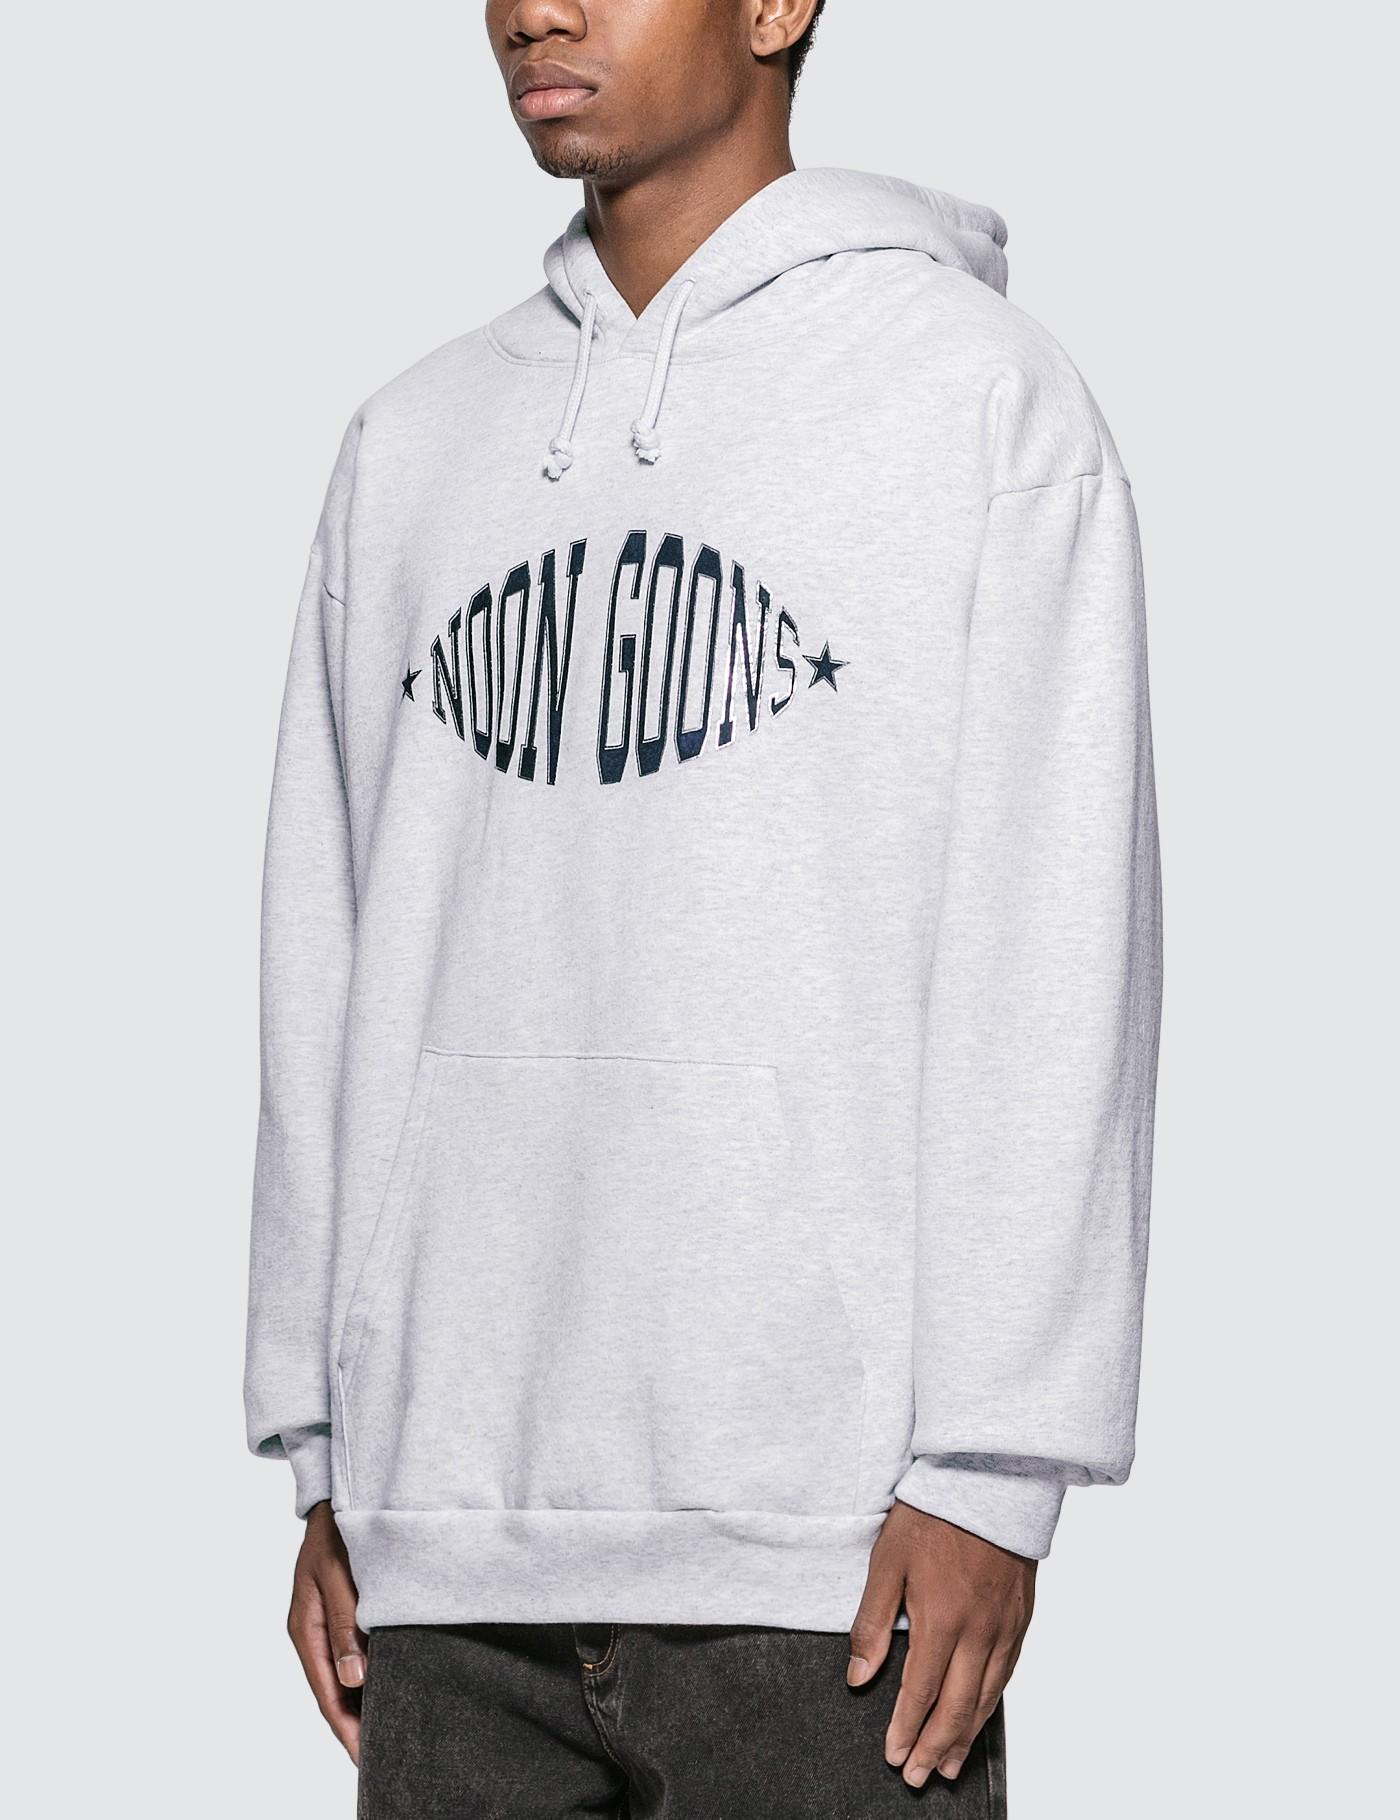 Noon Goons Cotton Team Logo Hoodie in Grey (Gray) for Men - Lyst